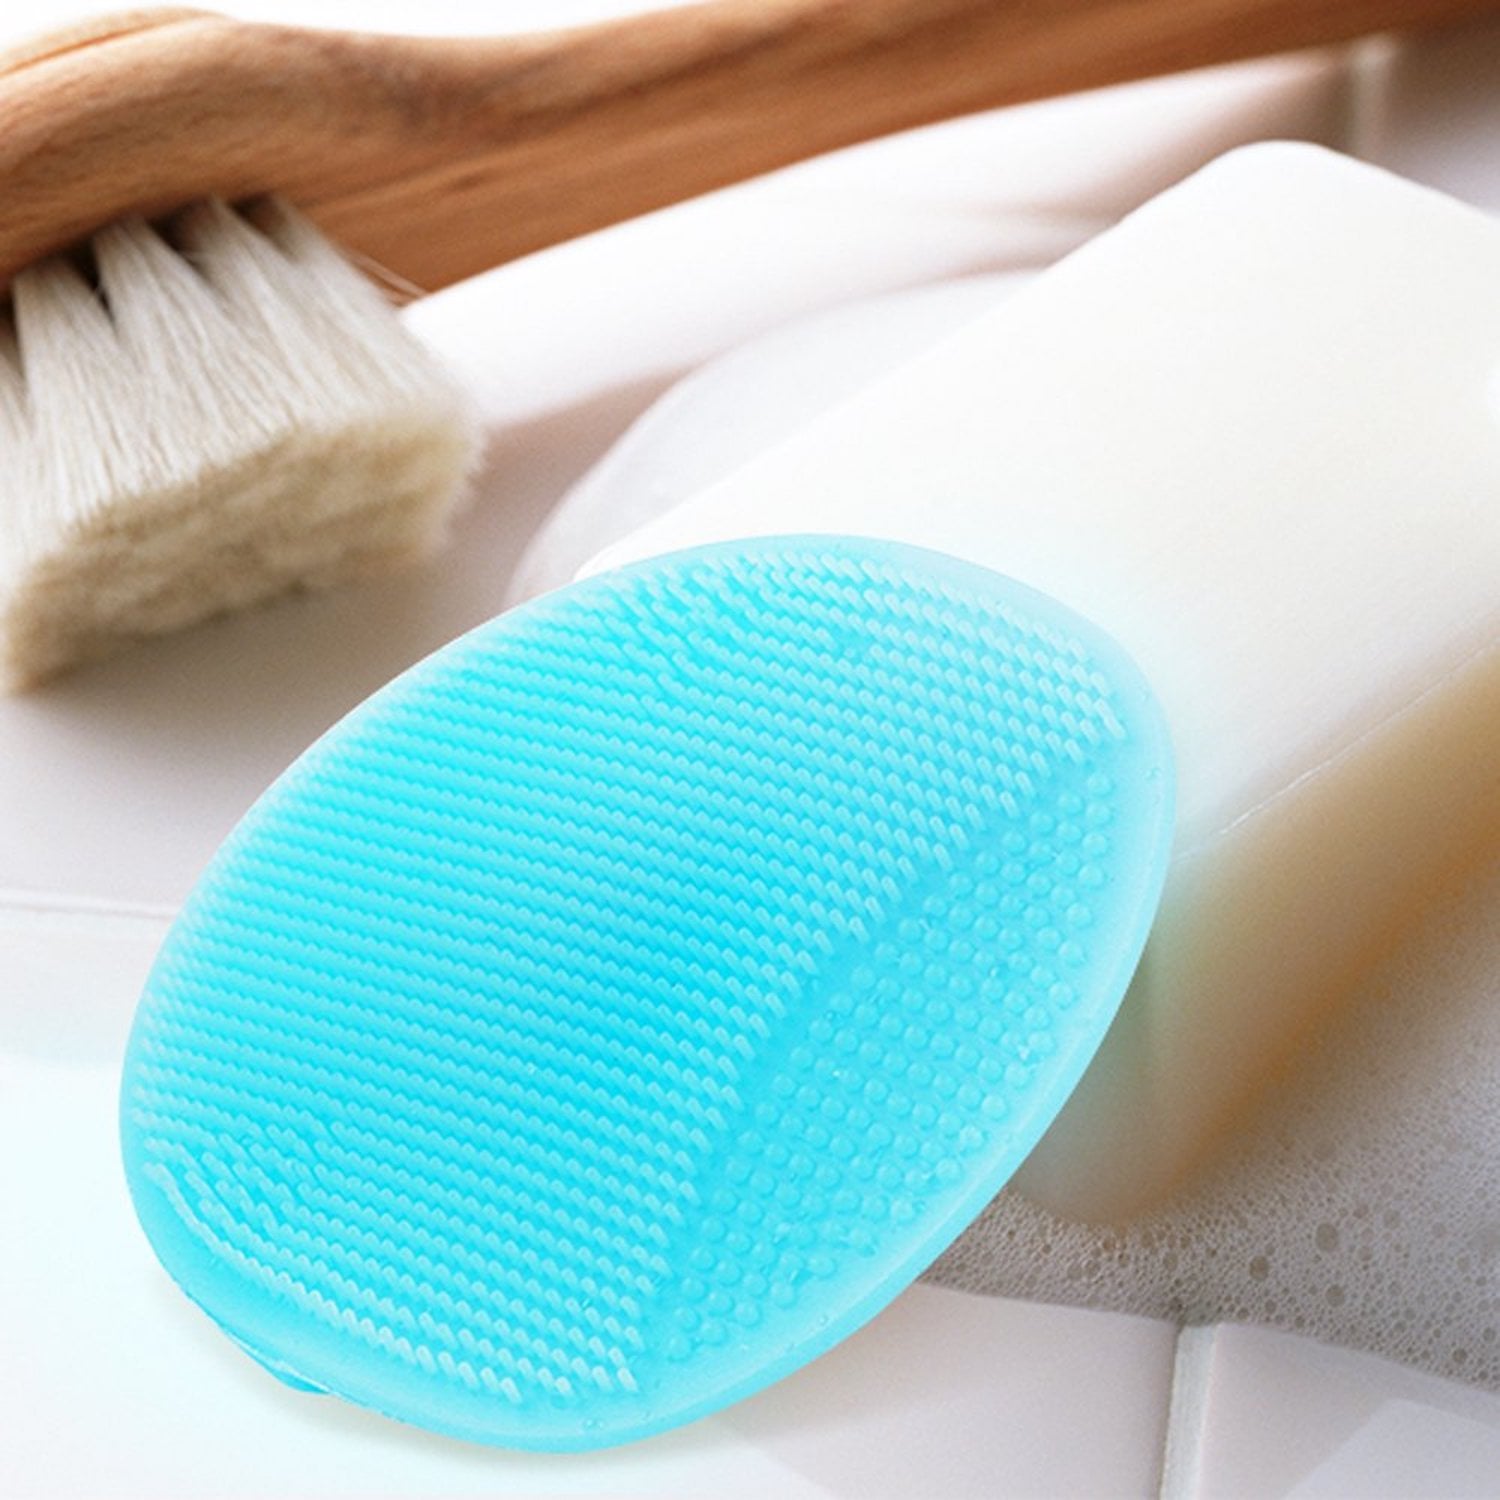 Best Silicone Skin Care Brushes